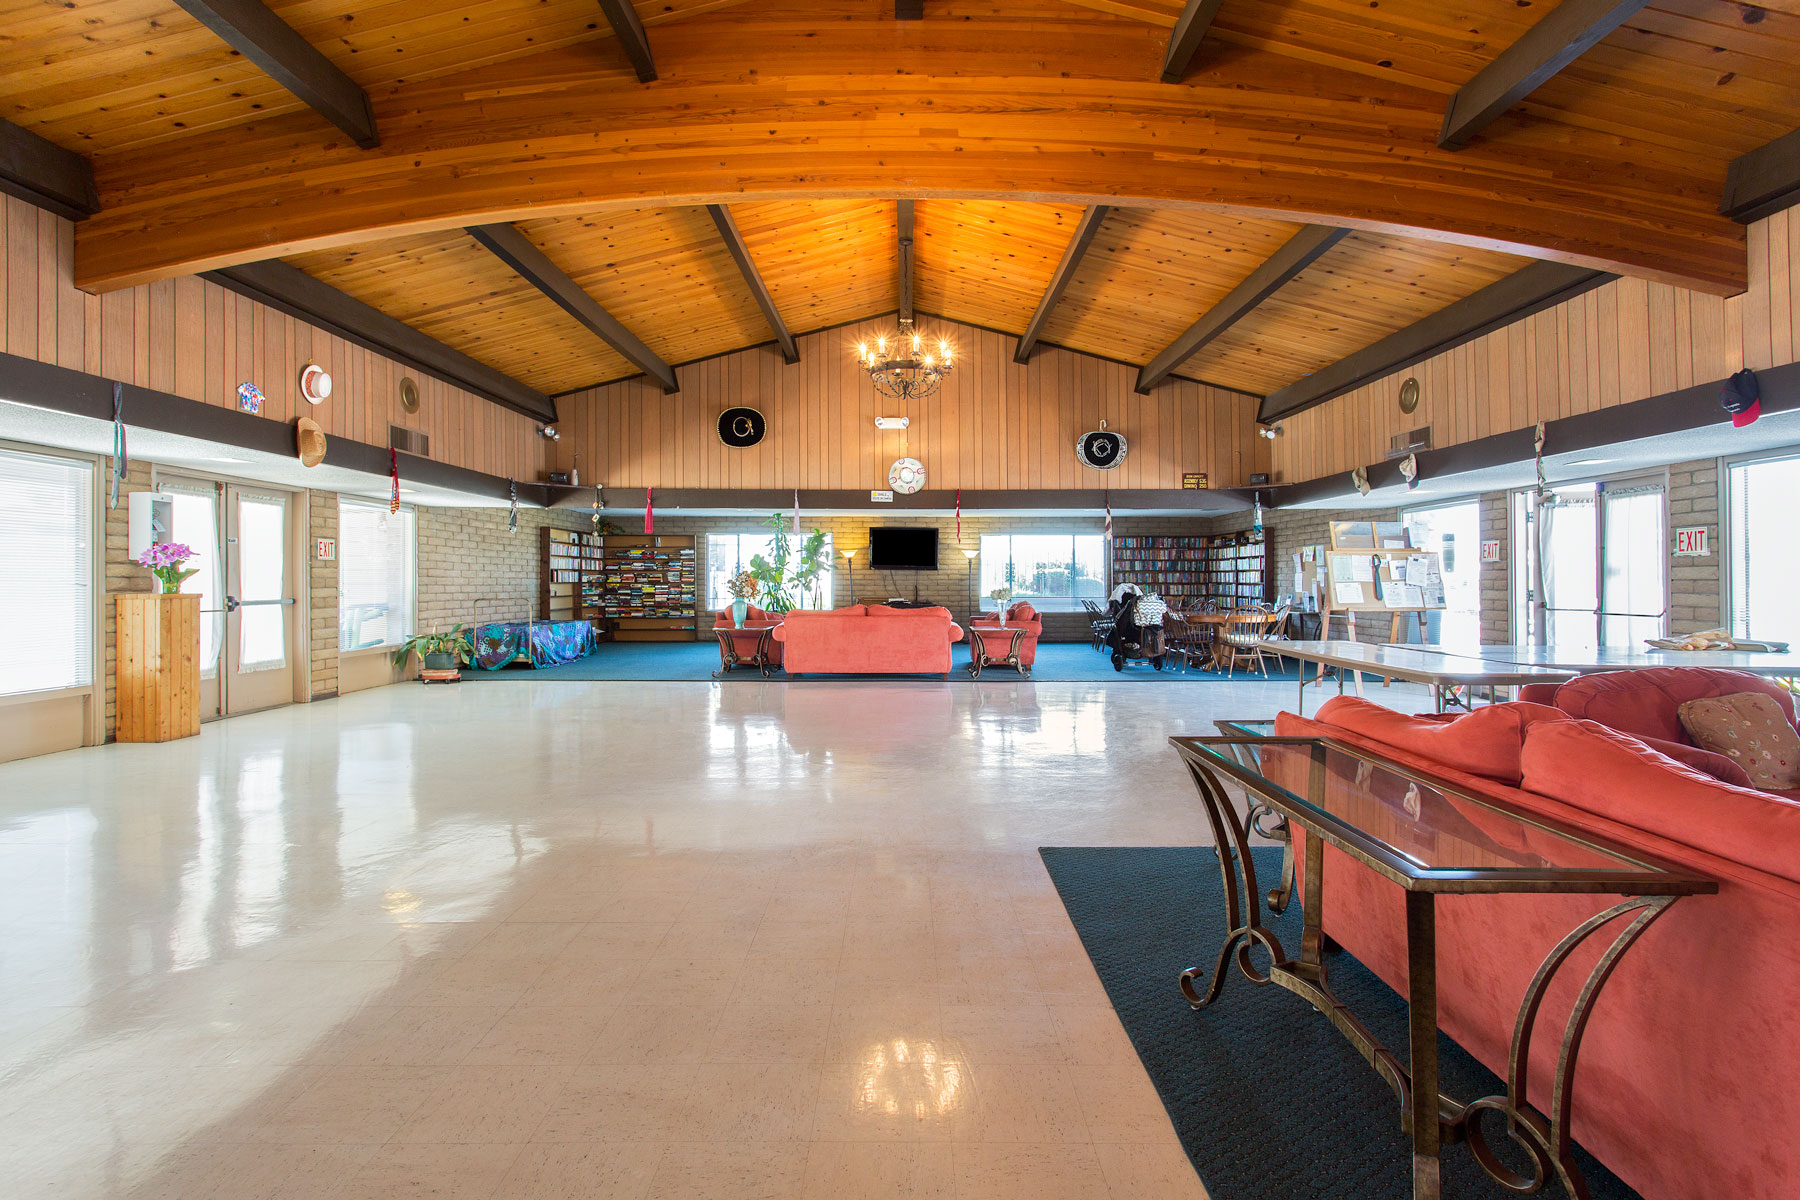 Large, open community center with high, light-wood, vaulted ceilings. Space for residents to lounge on the salmon pink couches or read a book from the novels provided.